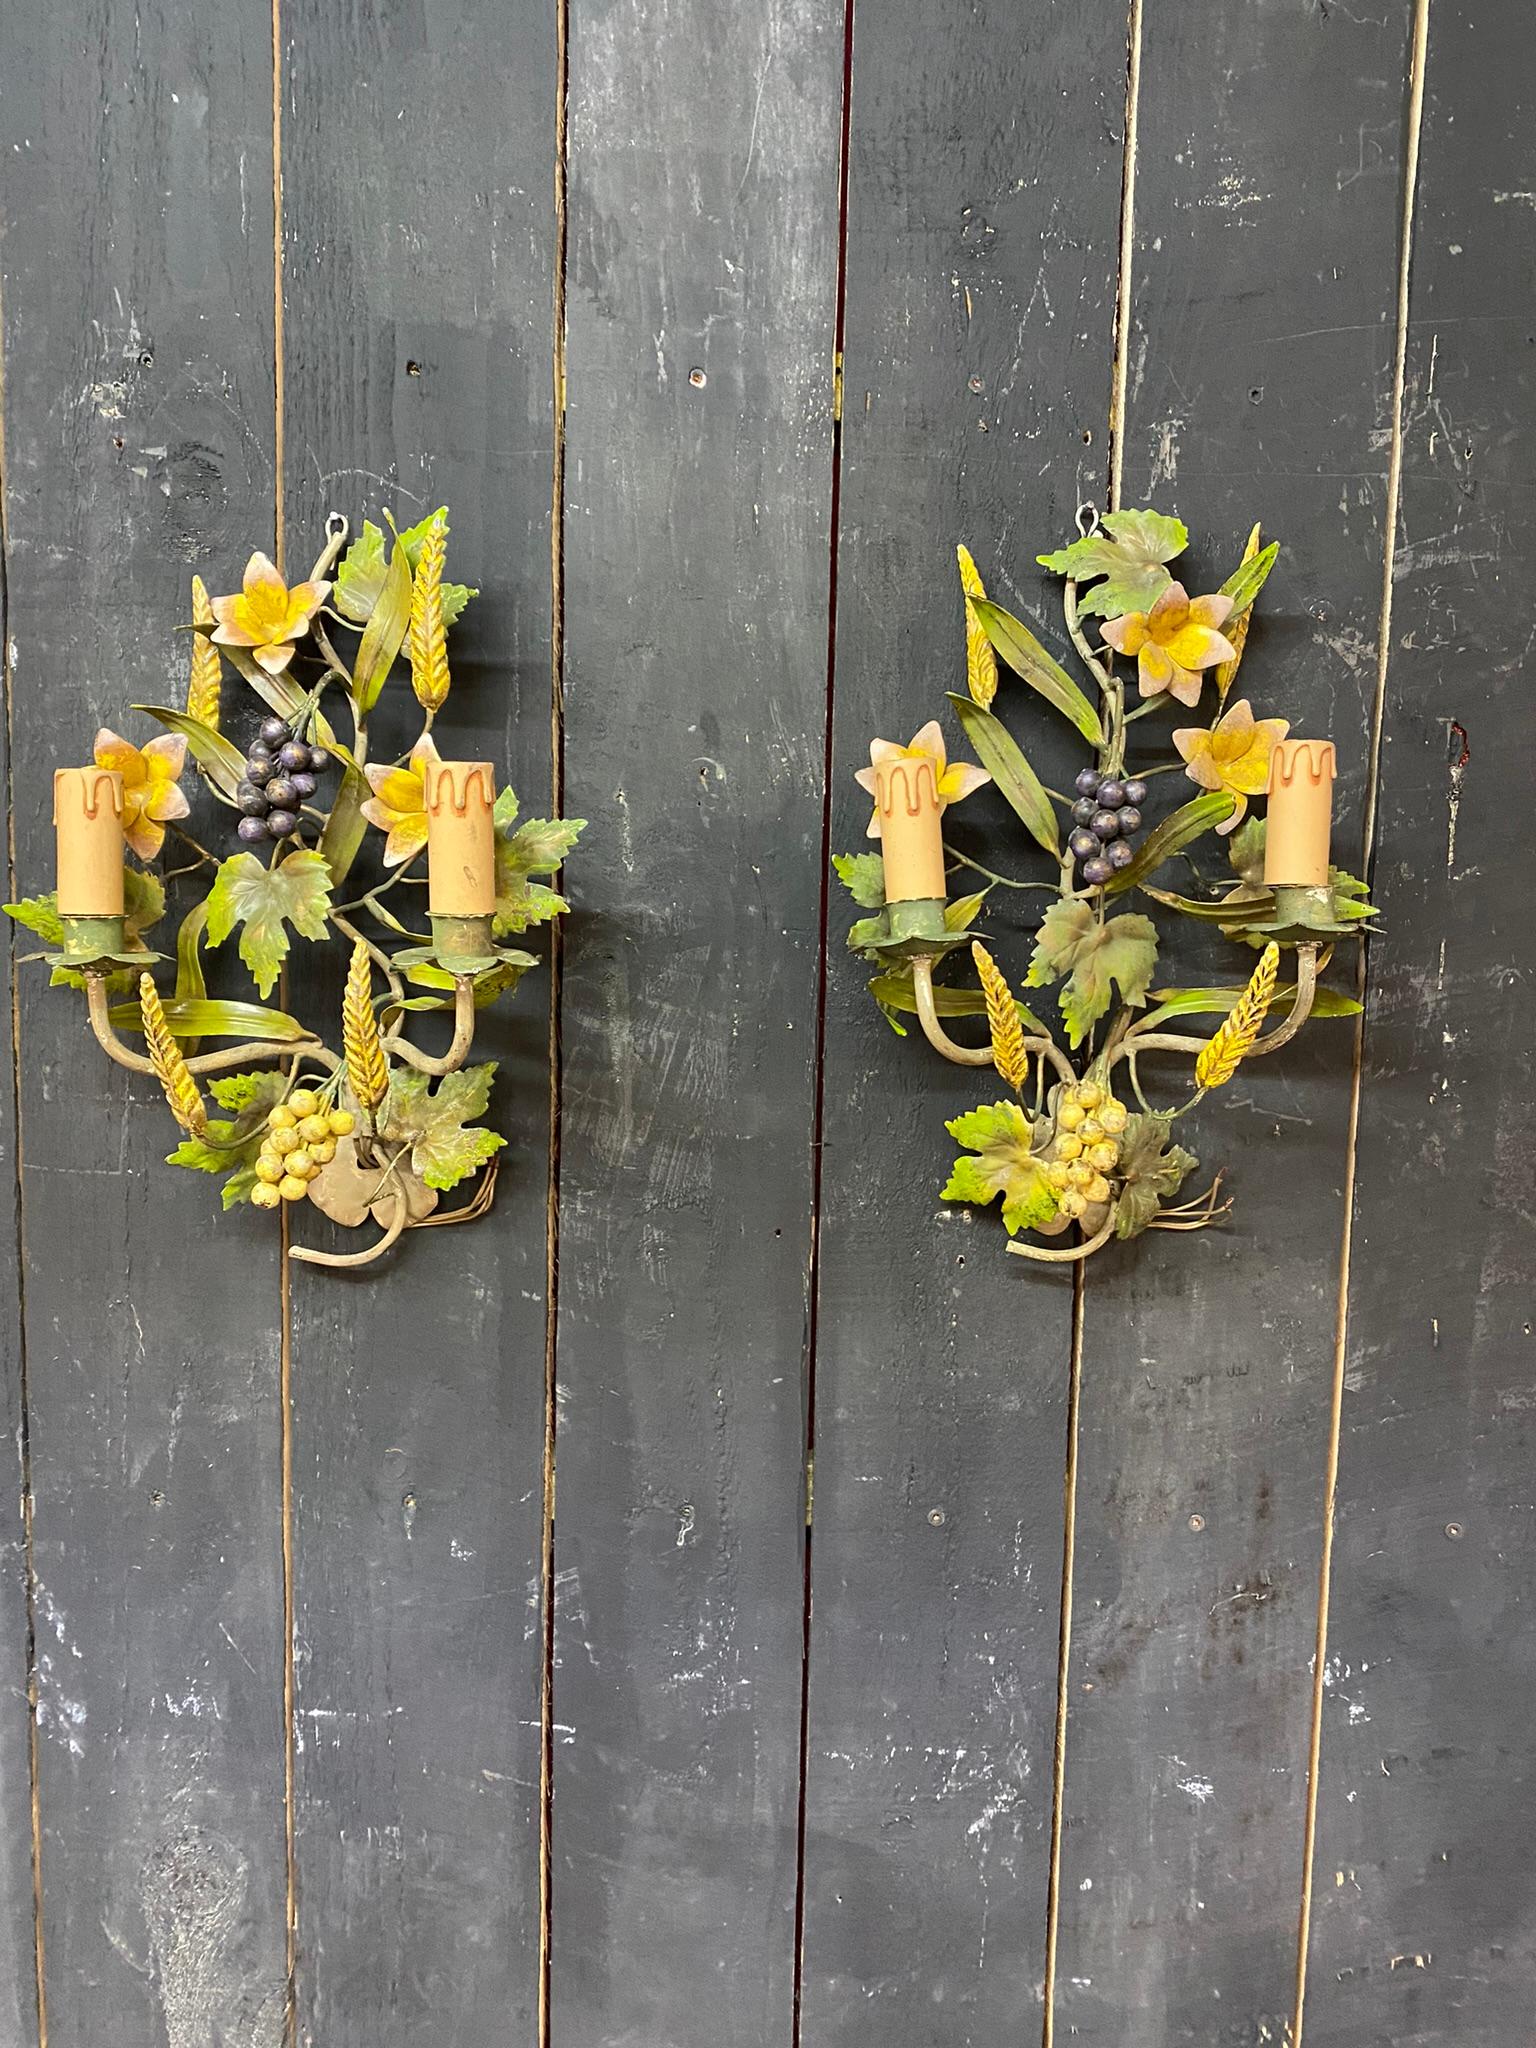 Pair of lacquered metal sconces, circa 1960
decorated with grapes and ears of wheat.